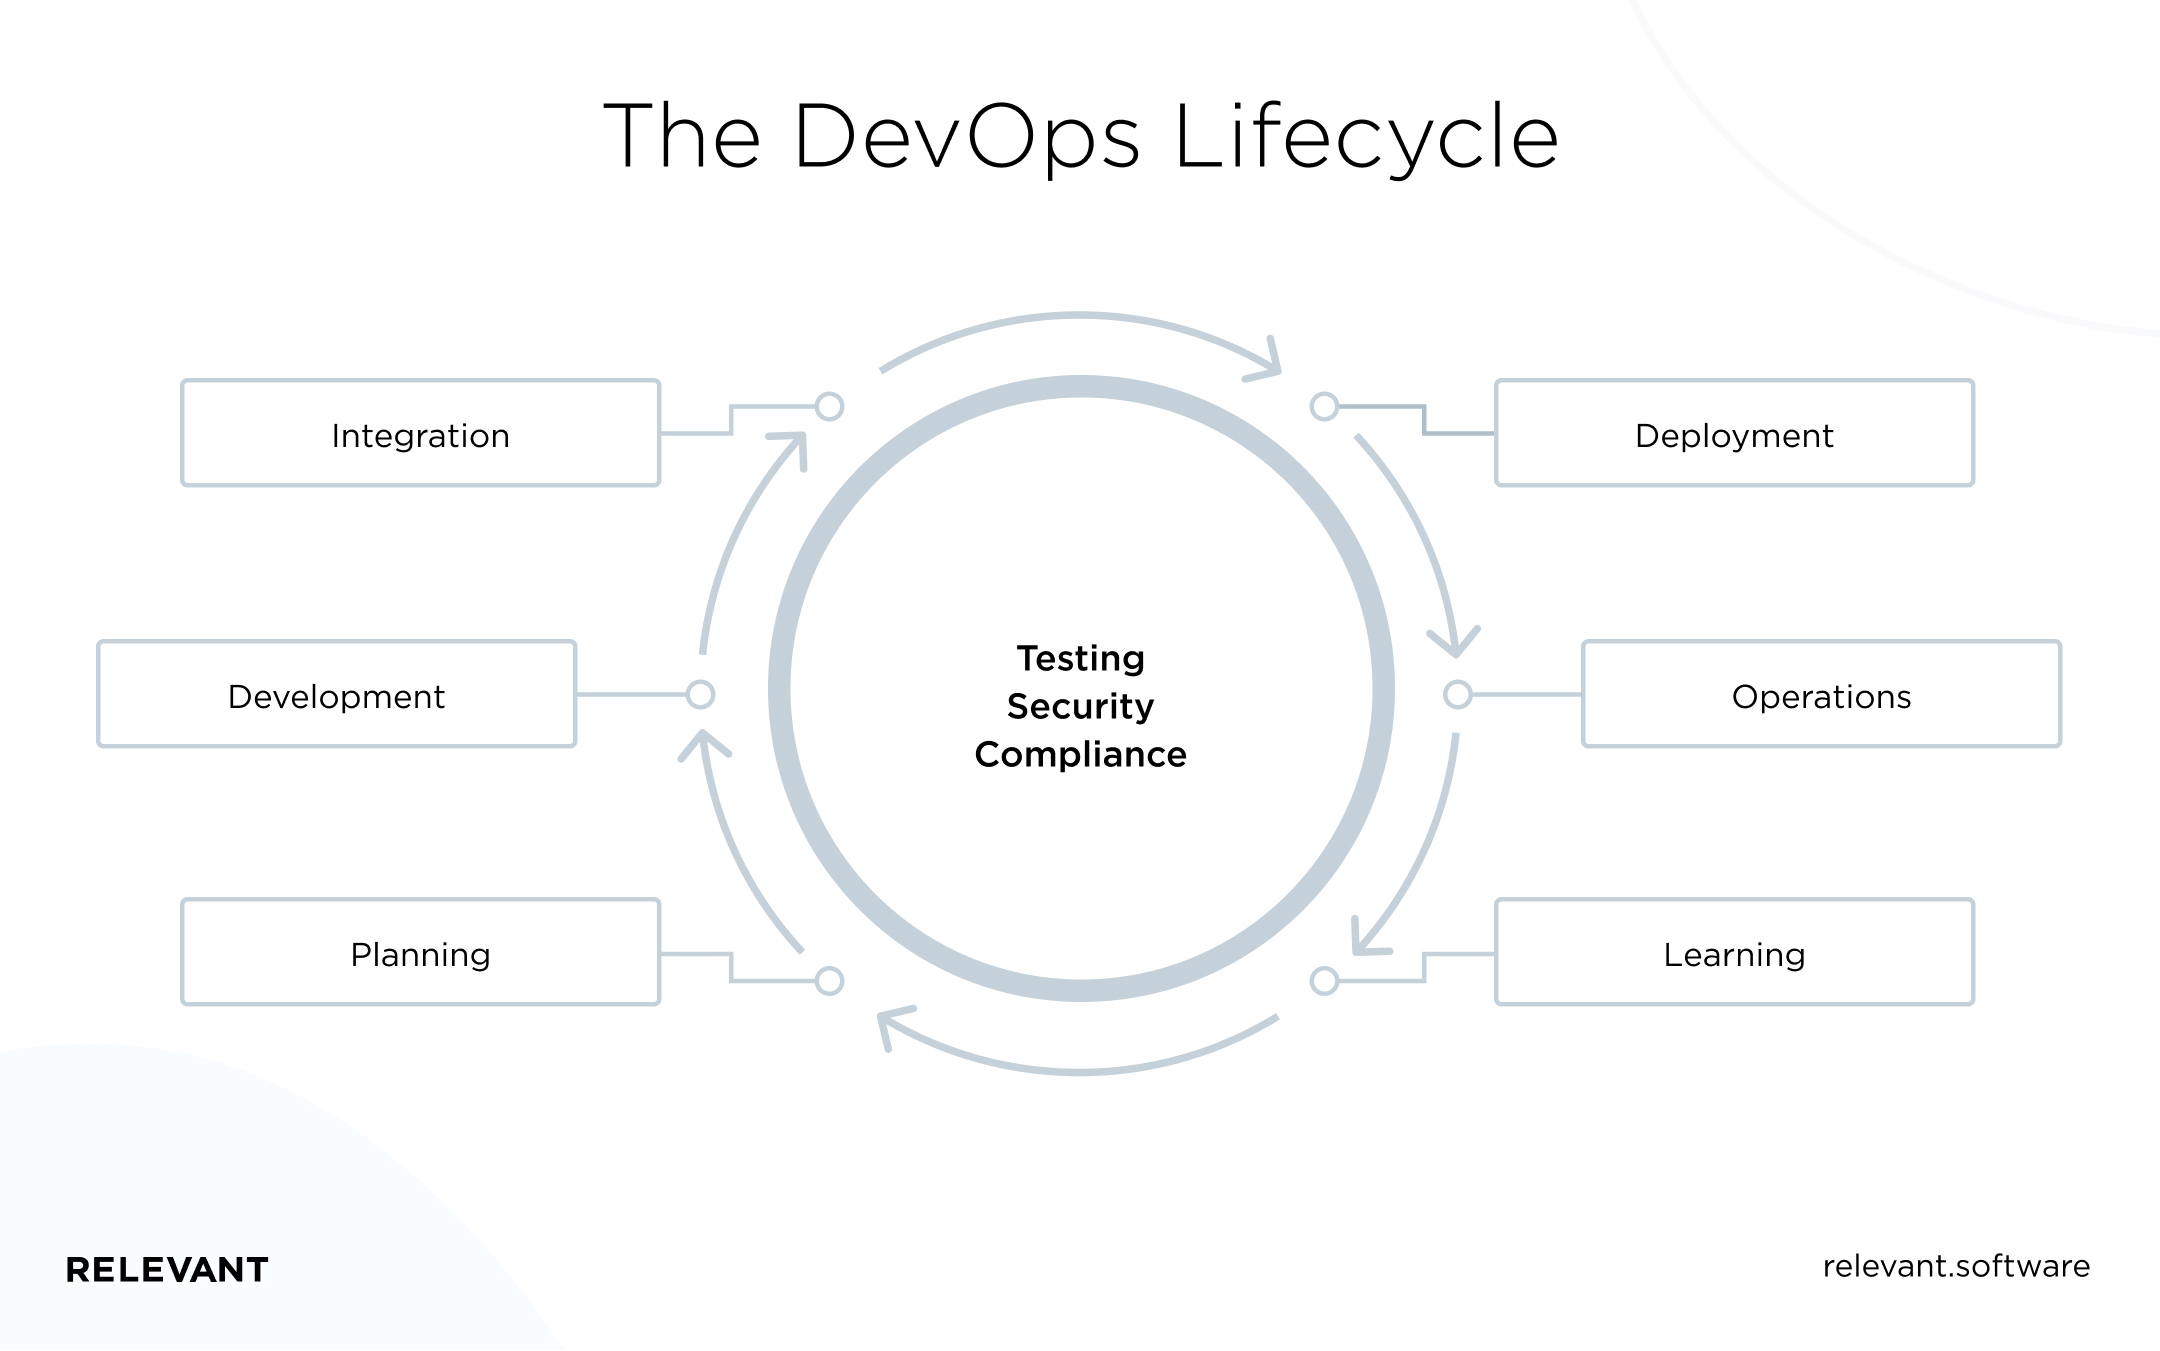  The DevOps Lifecycle